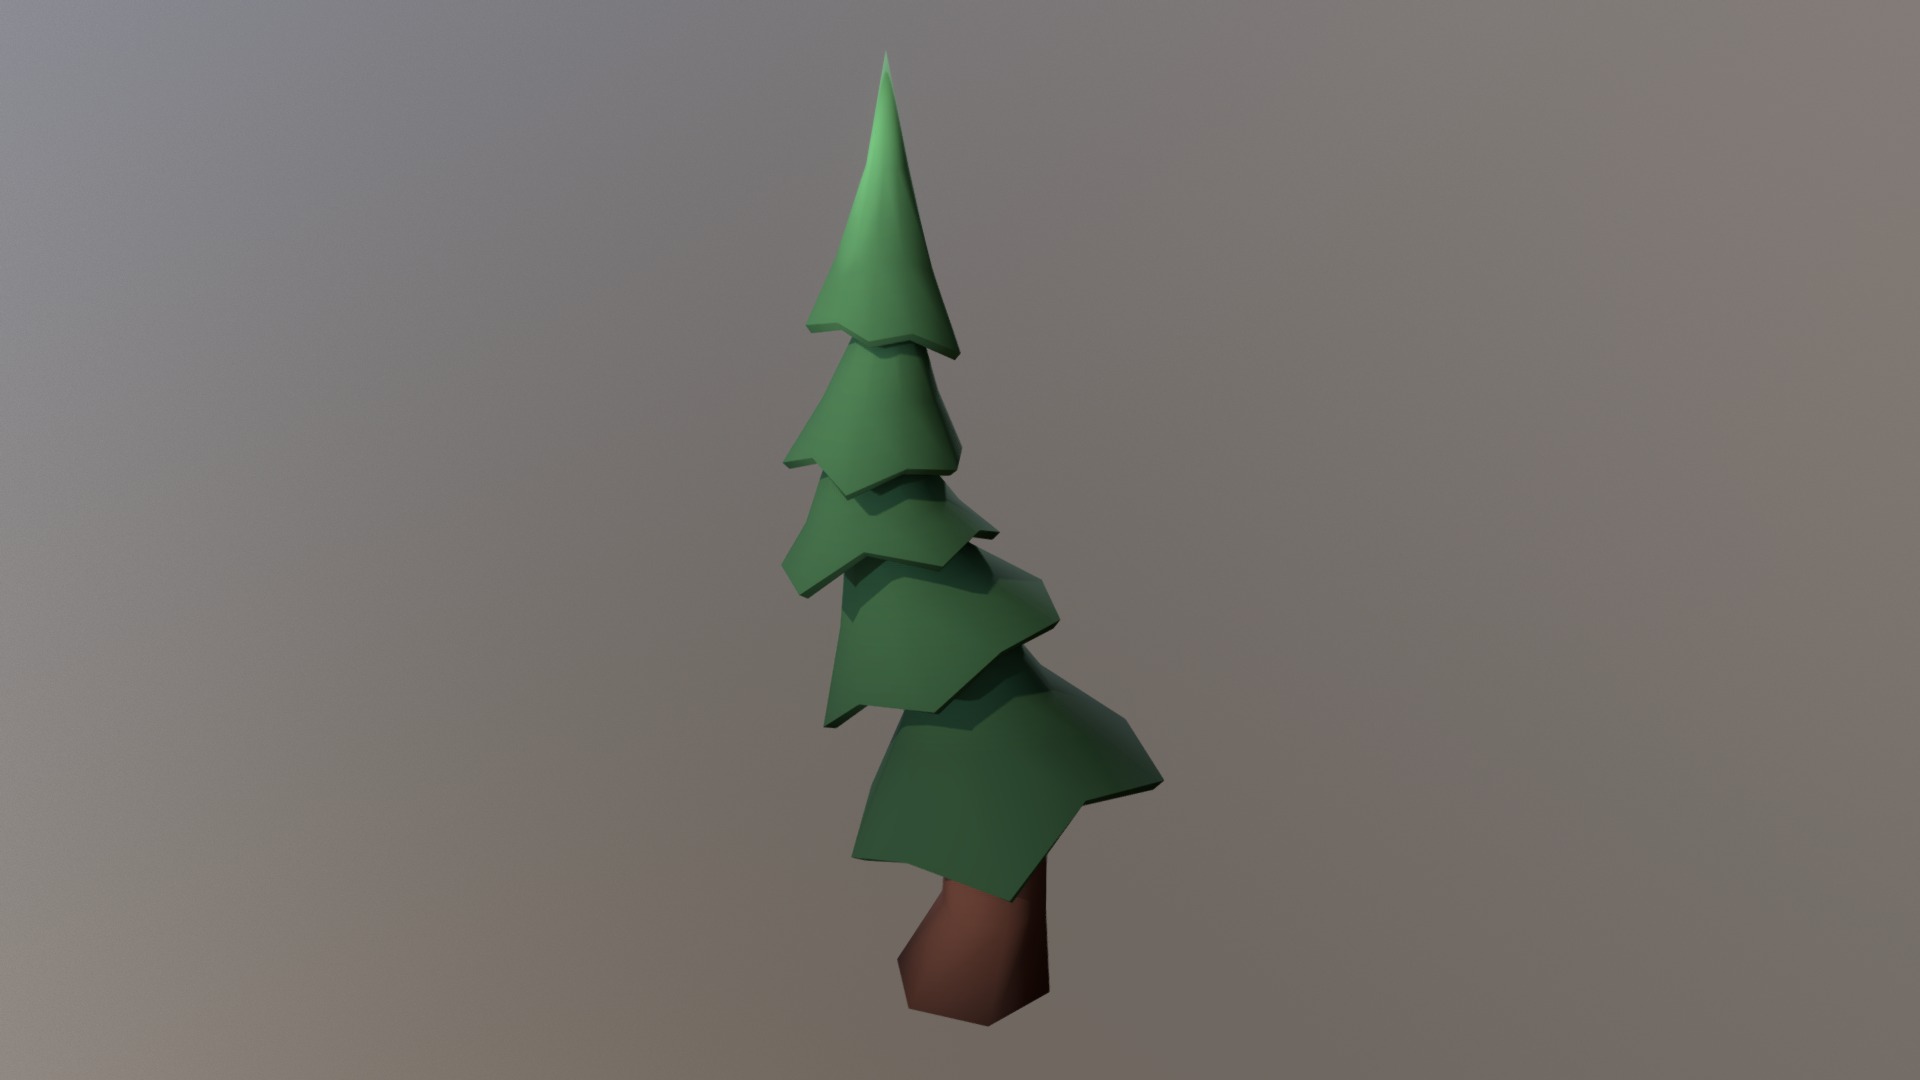 3D model Tree 01 - This is a 3D model of the Tree 01. The 3D model is about a green paper cone.